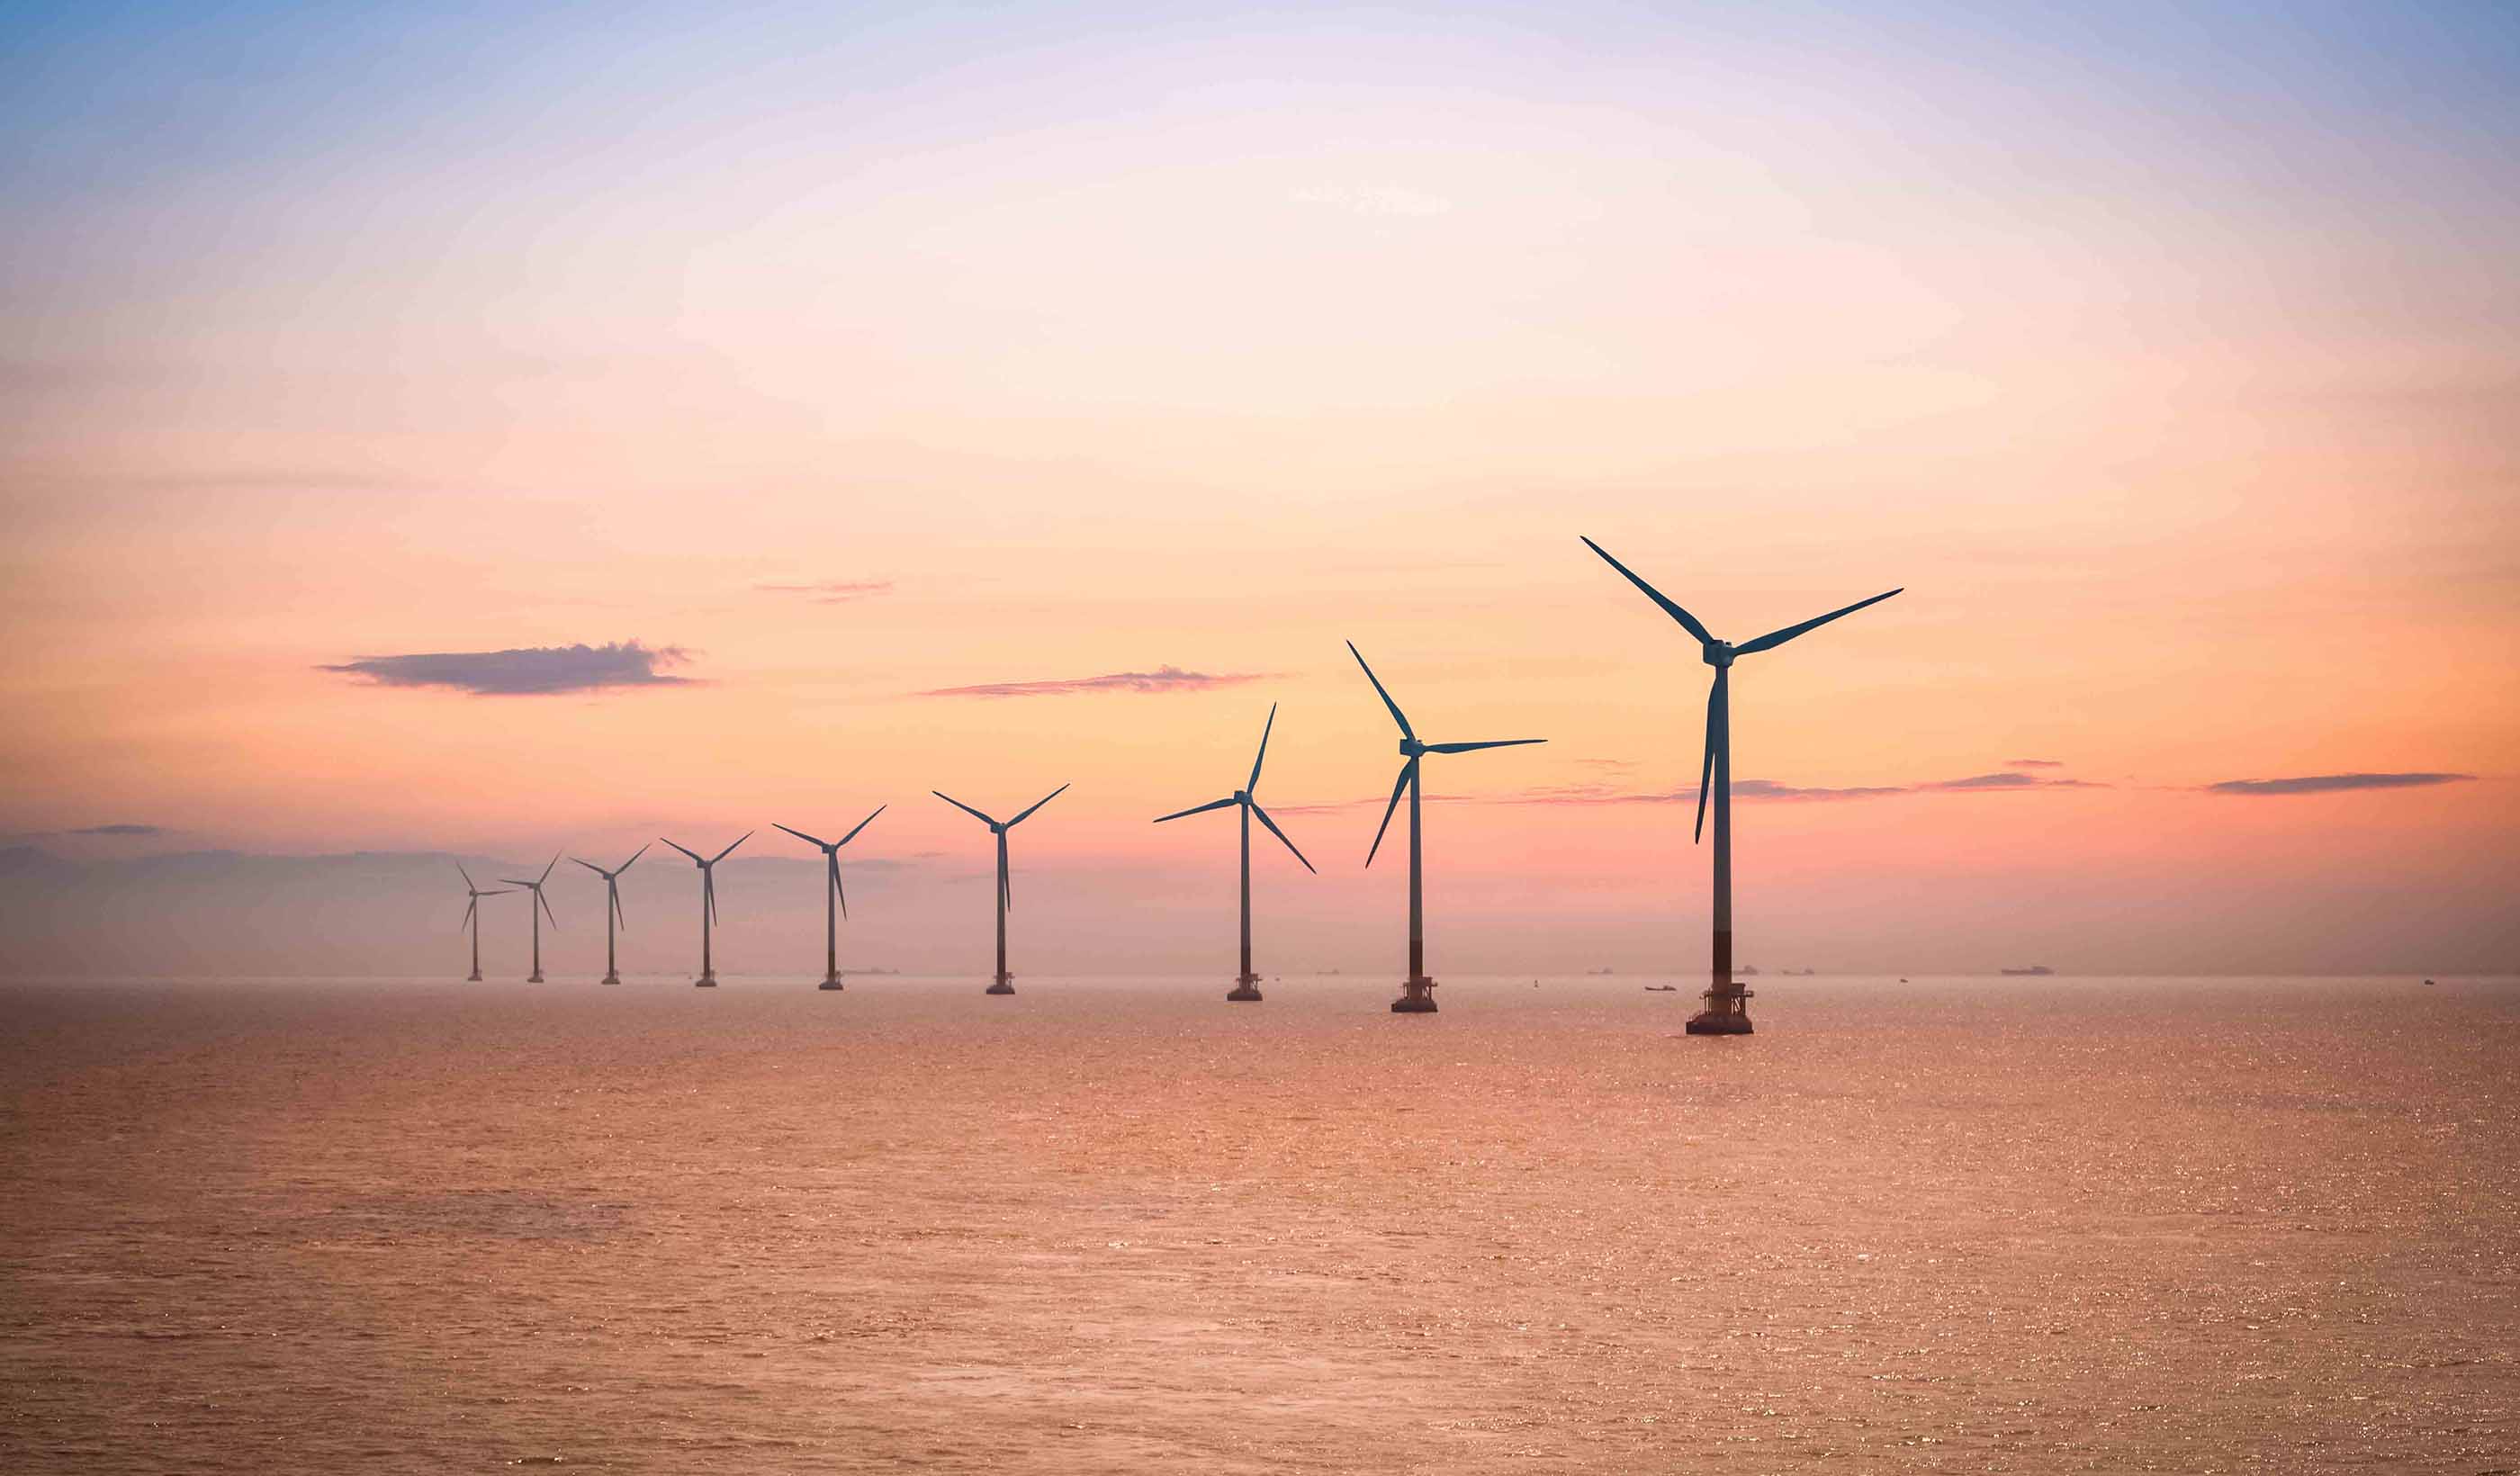 Powering our communities with offshore wind energy